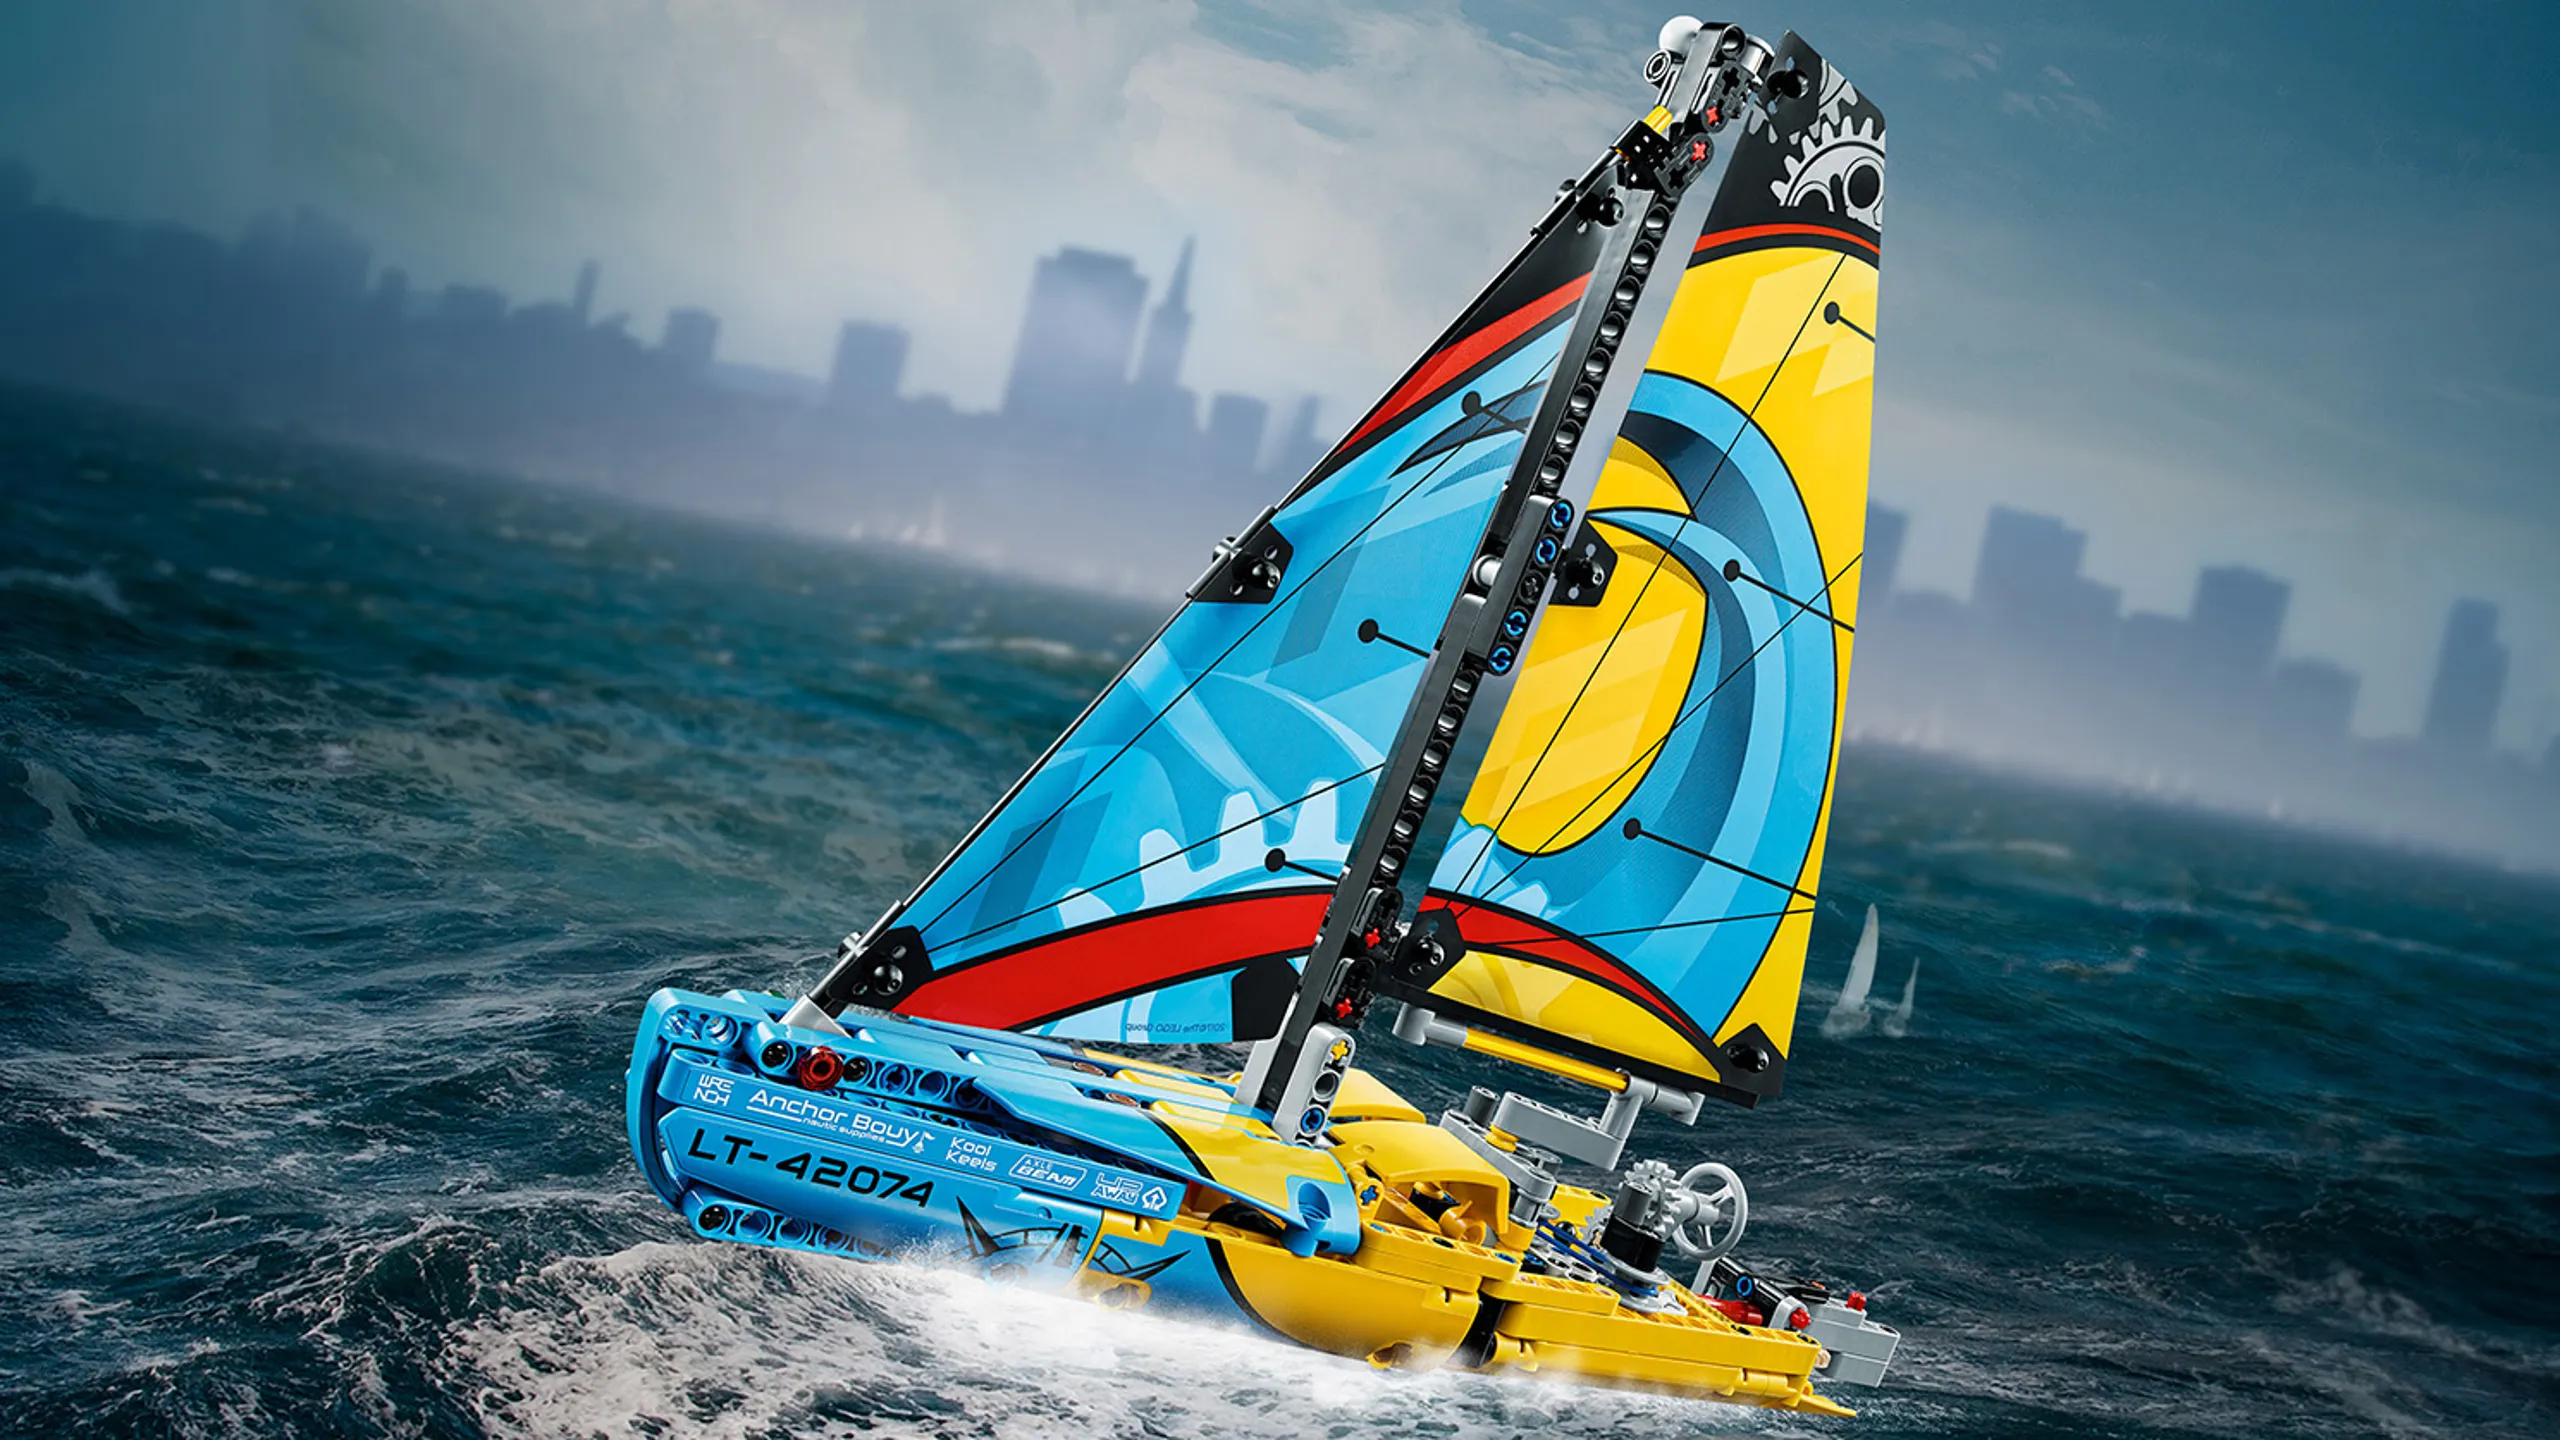 LEGO Technic - 42074 Racing Yacht - Be the first to the finish line with the sporty Racing Yacht in yellow and blue colors with printed sails, lines and winches, and a detailed hull.